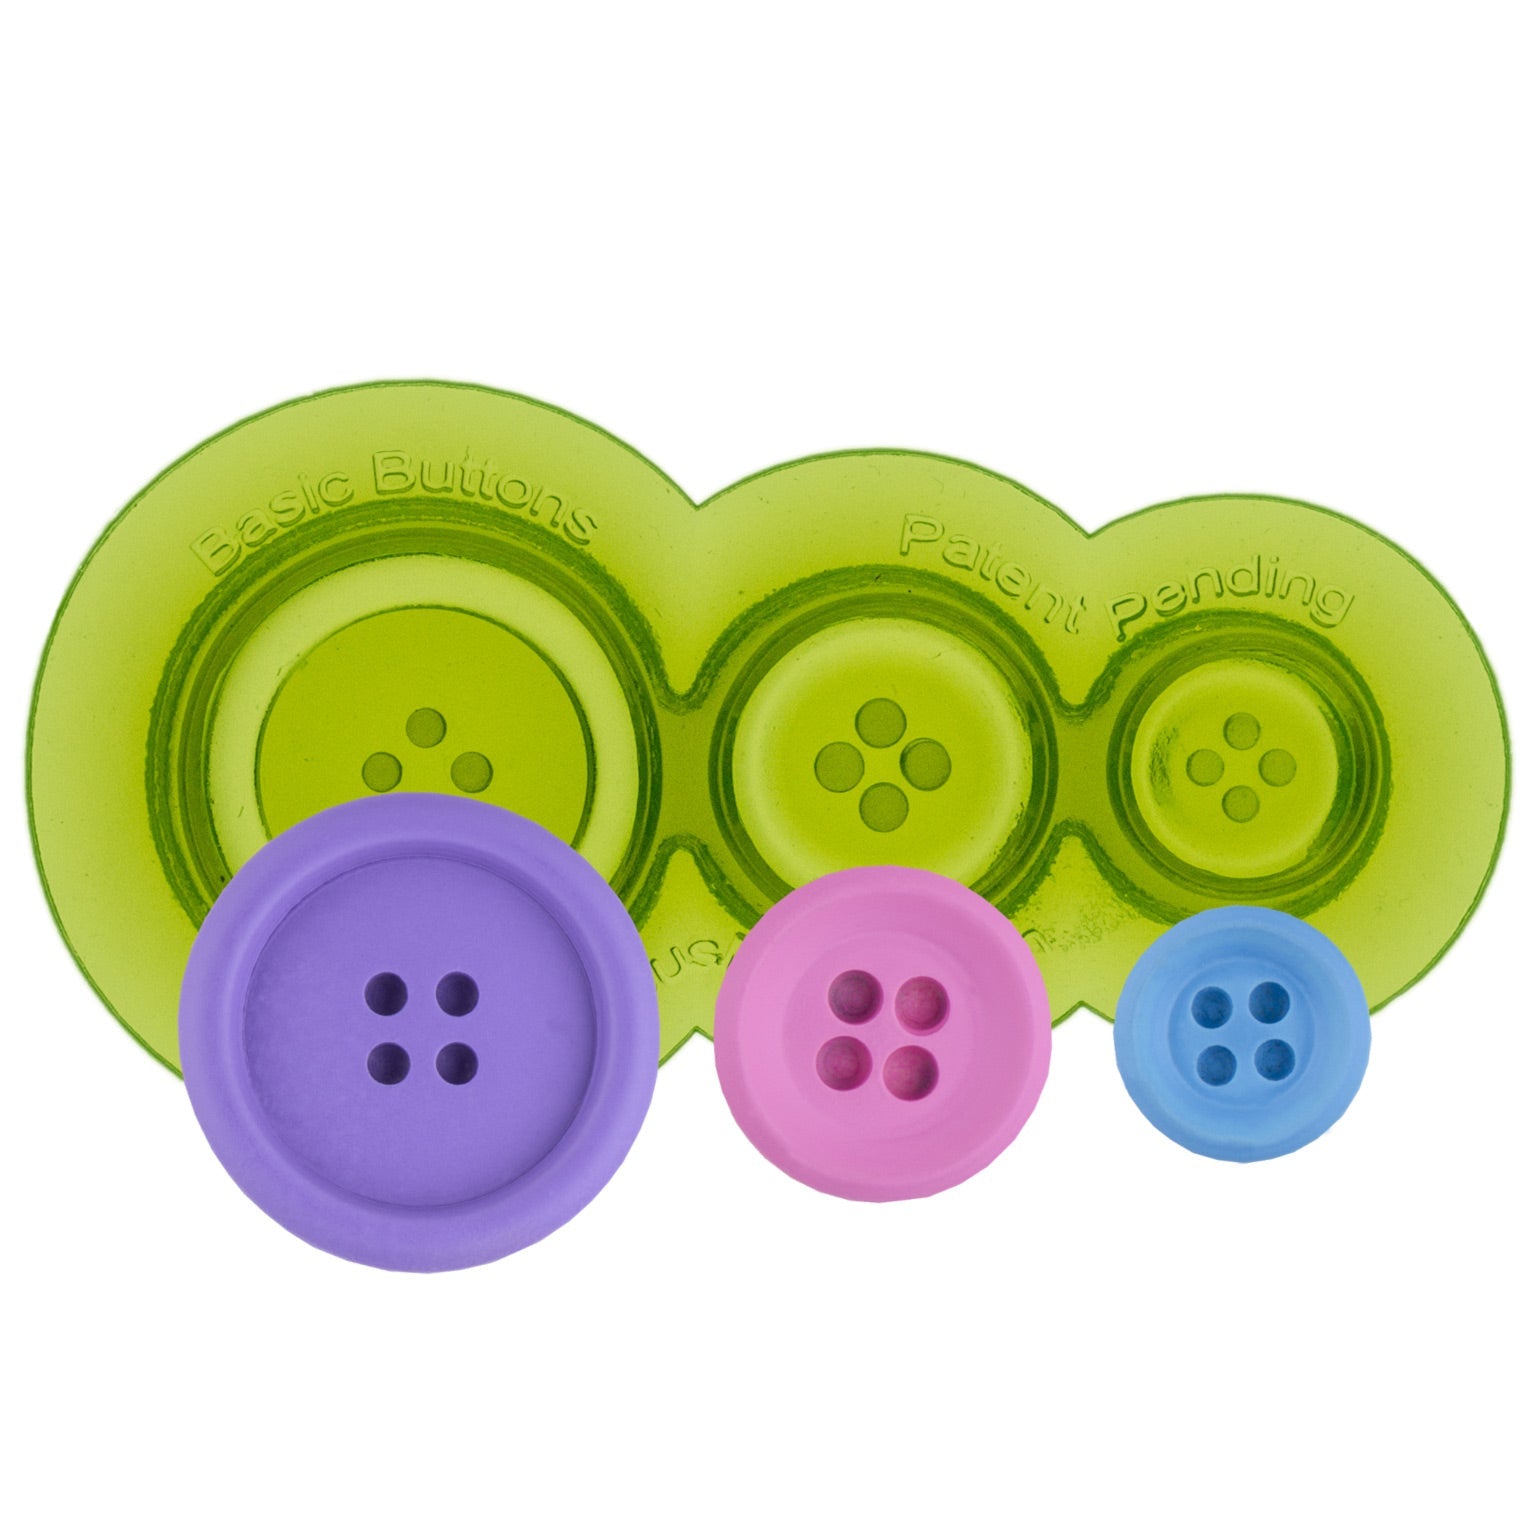 Find Knots Button Mold Marvelous Molds X that is affordable and get the  look at less cost